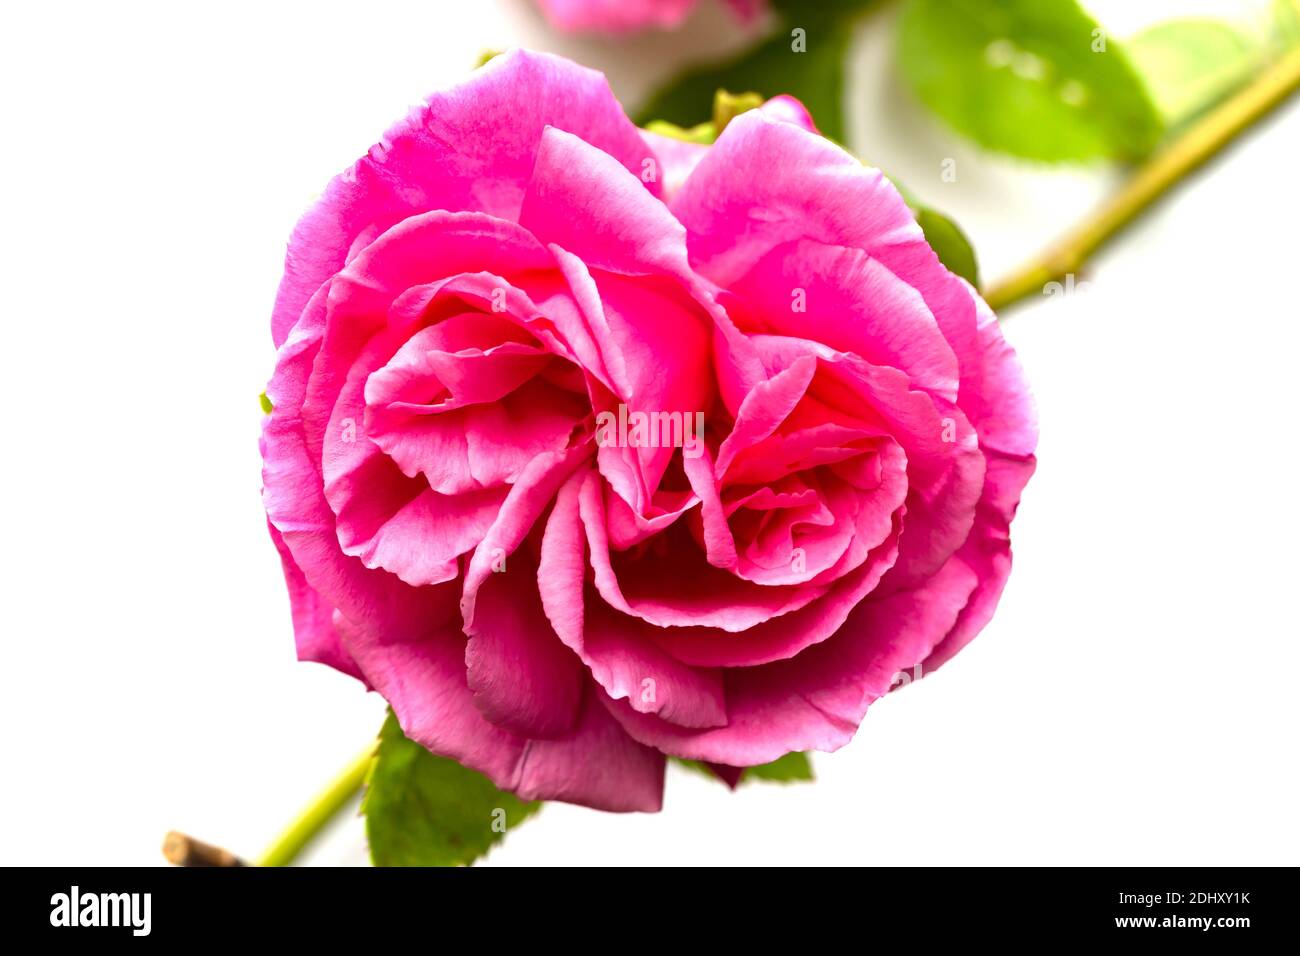 Solitary pink rose on its stem against a white background Stock Photo